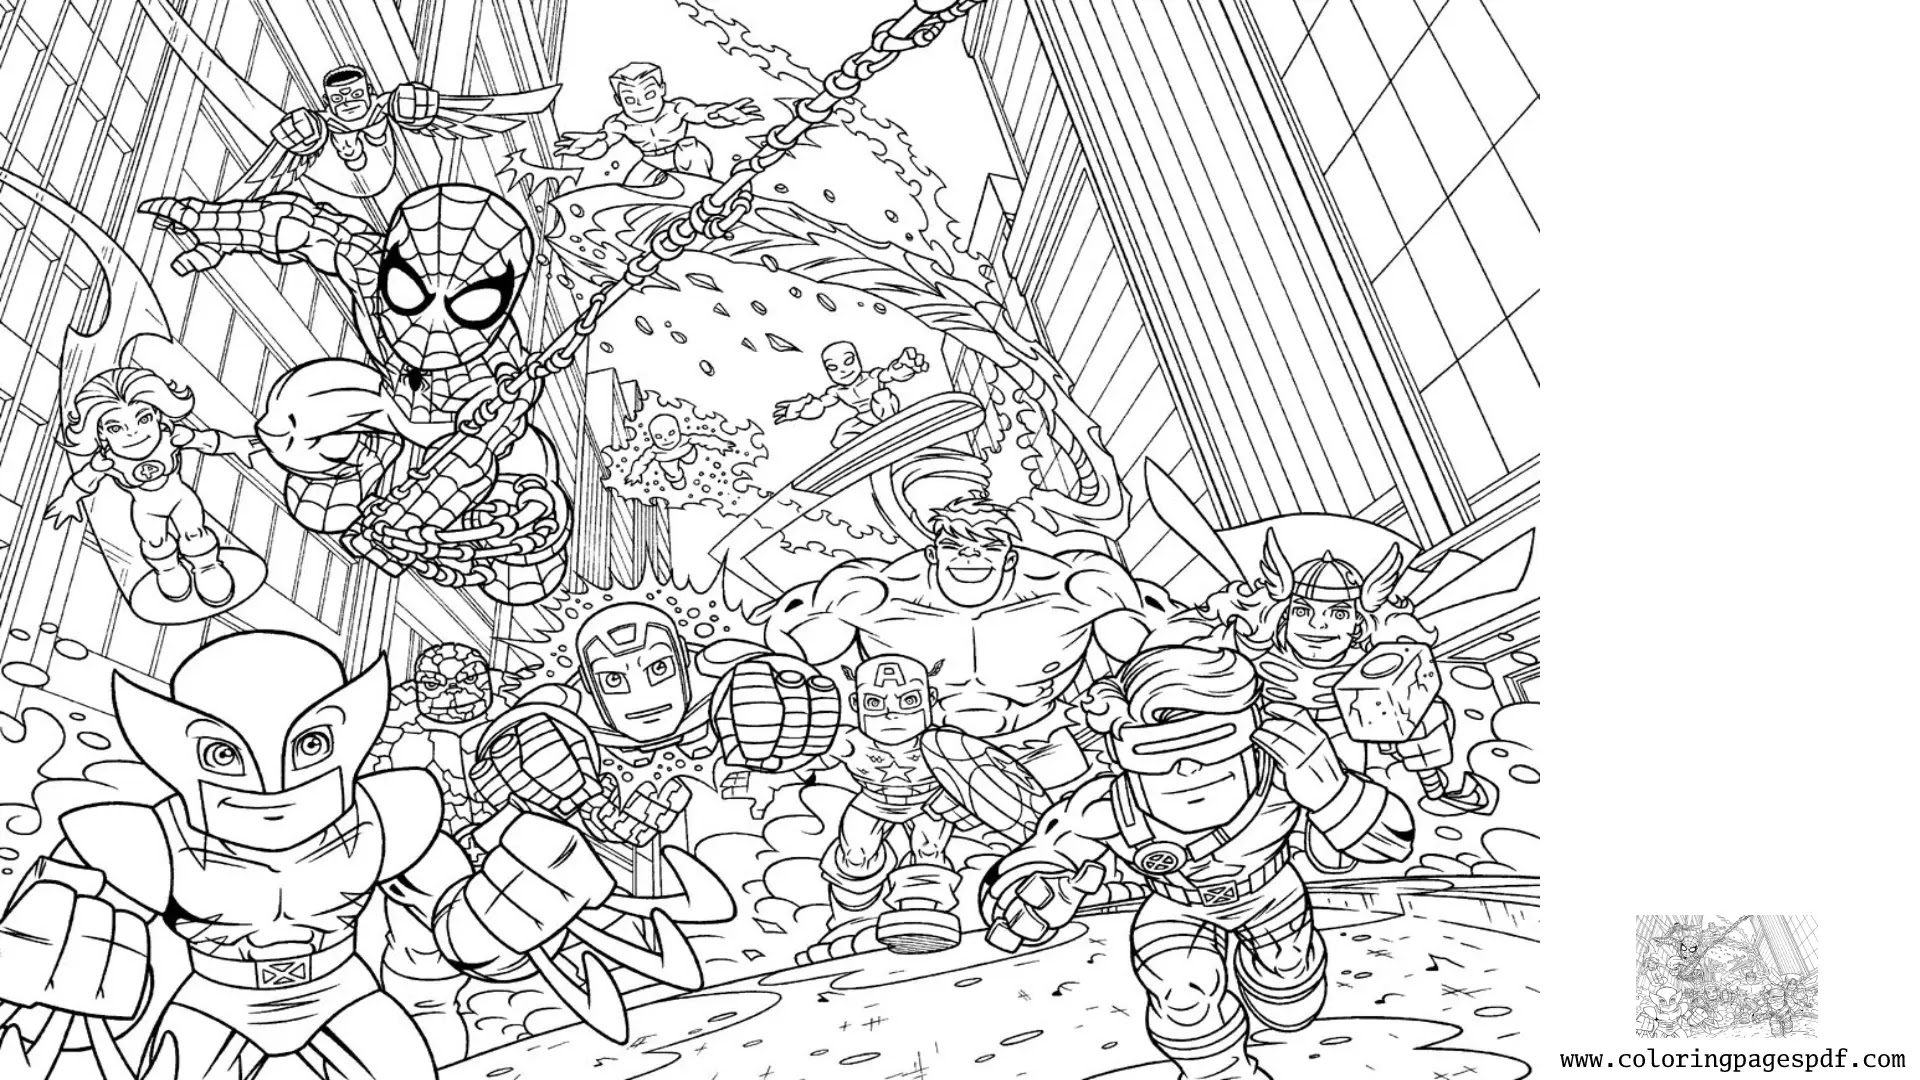 Coloring Pages Of Chibi Avengers